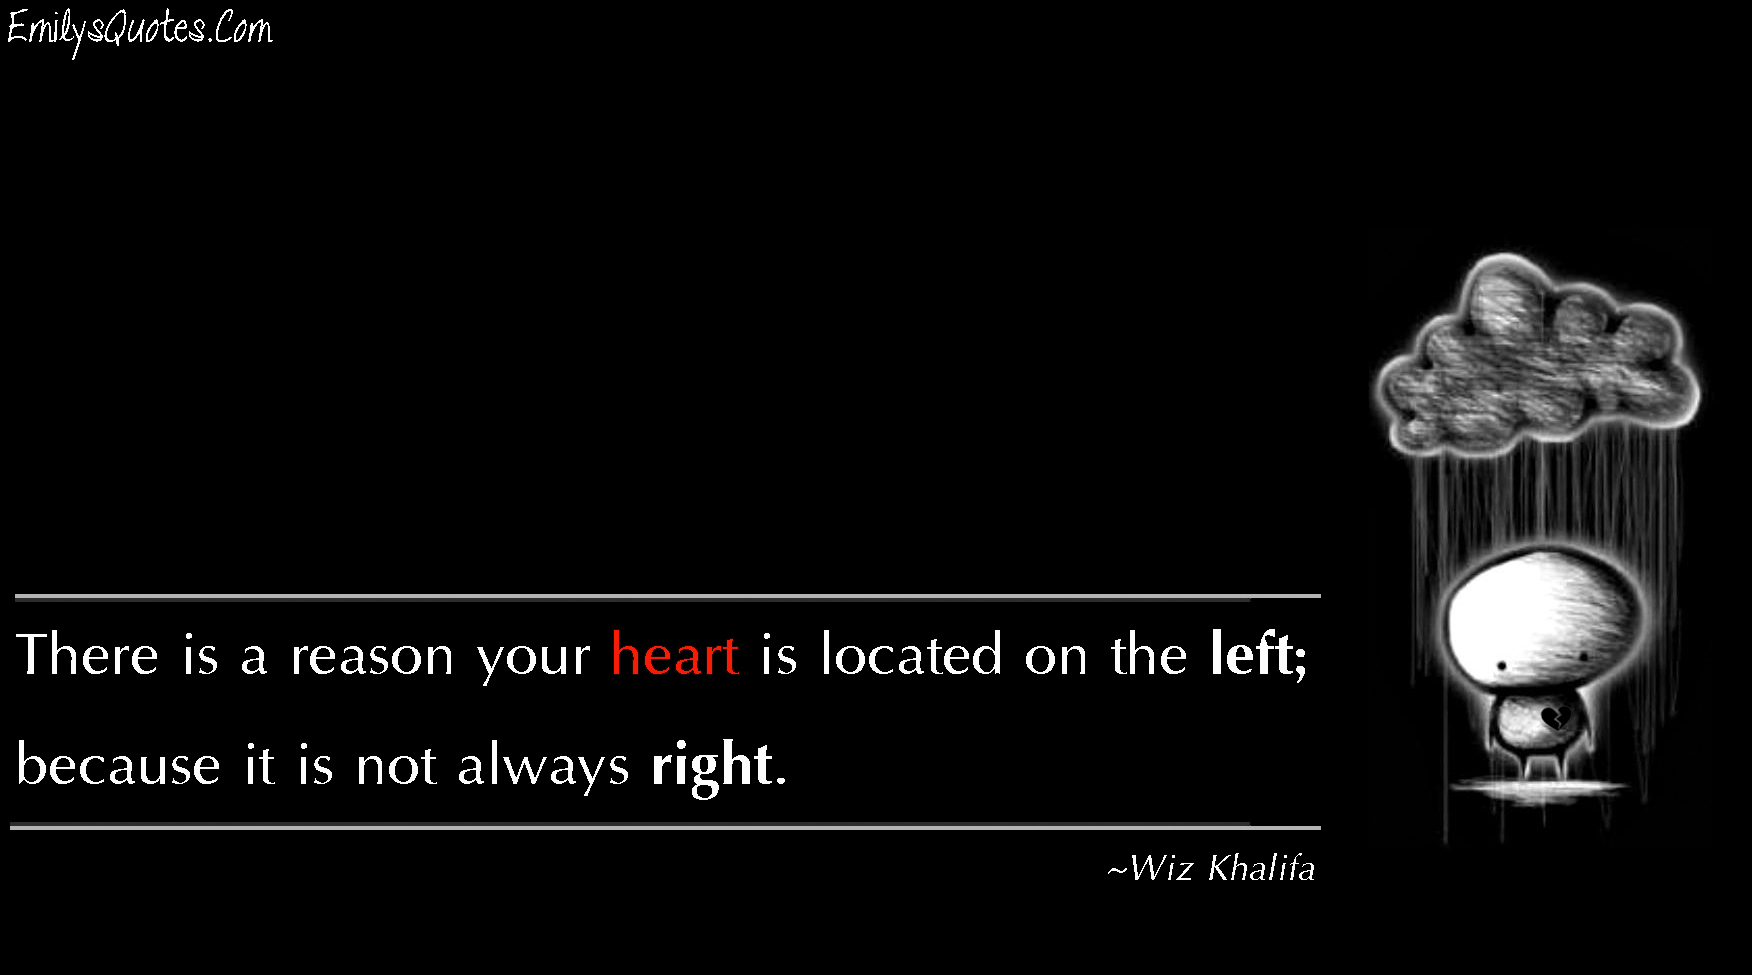 There is a reason your heart is located on the left; because it is not always right